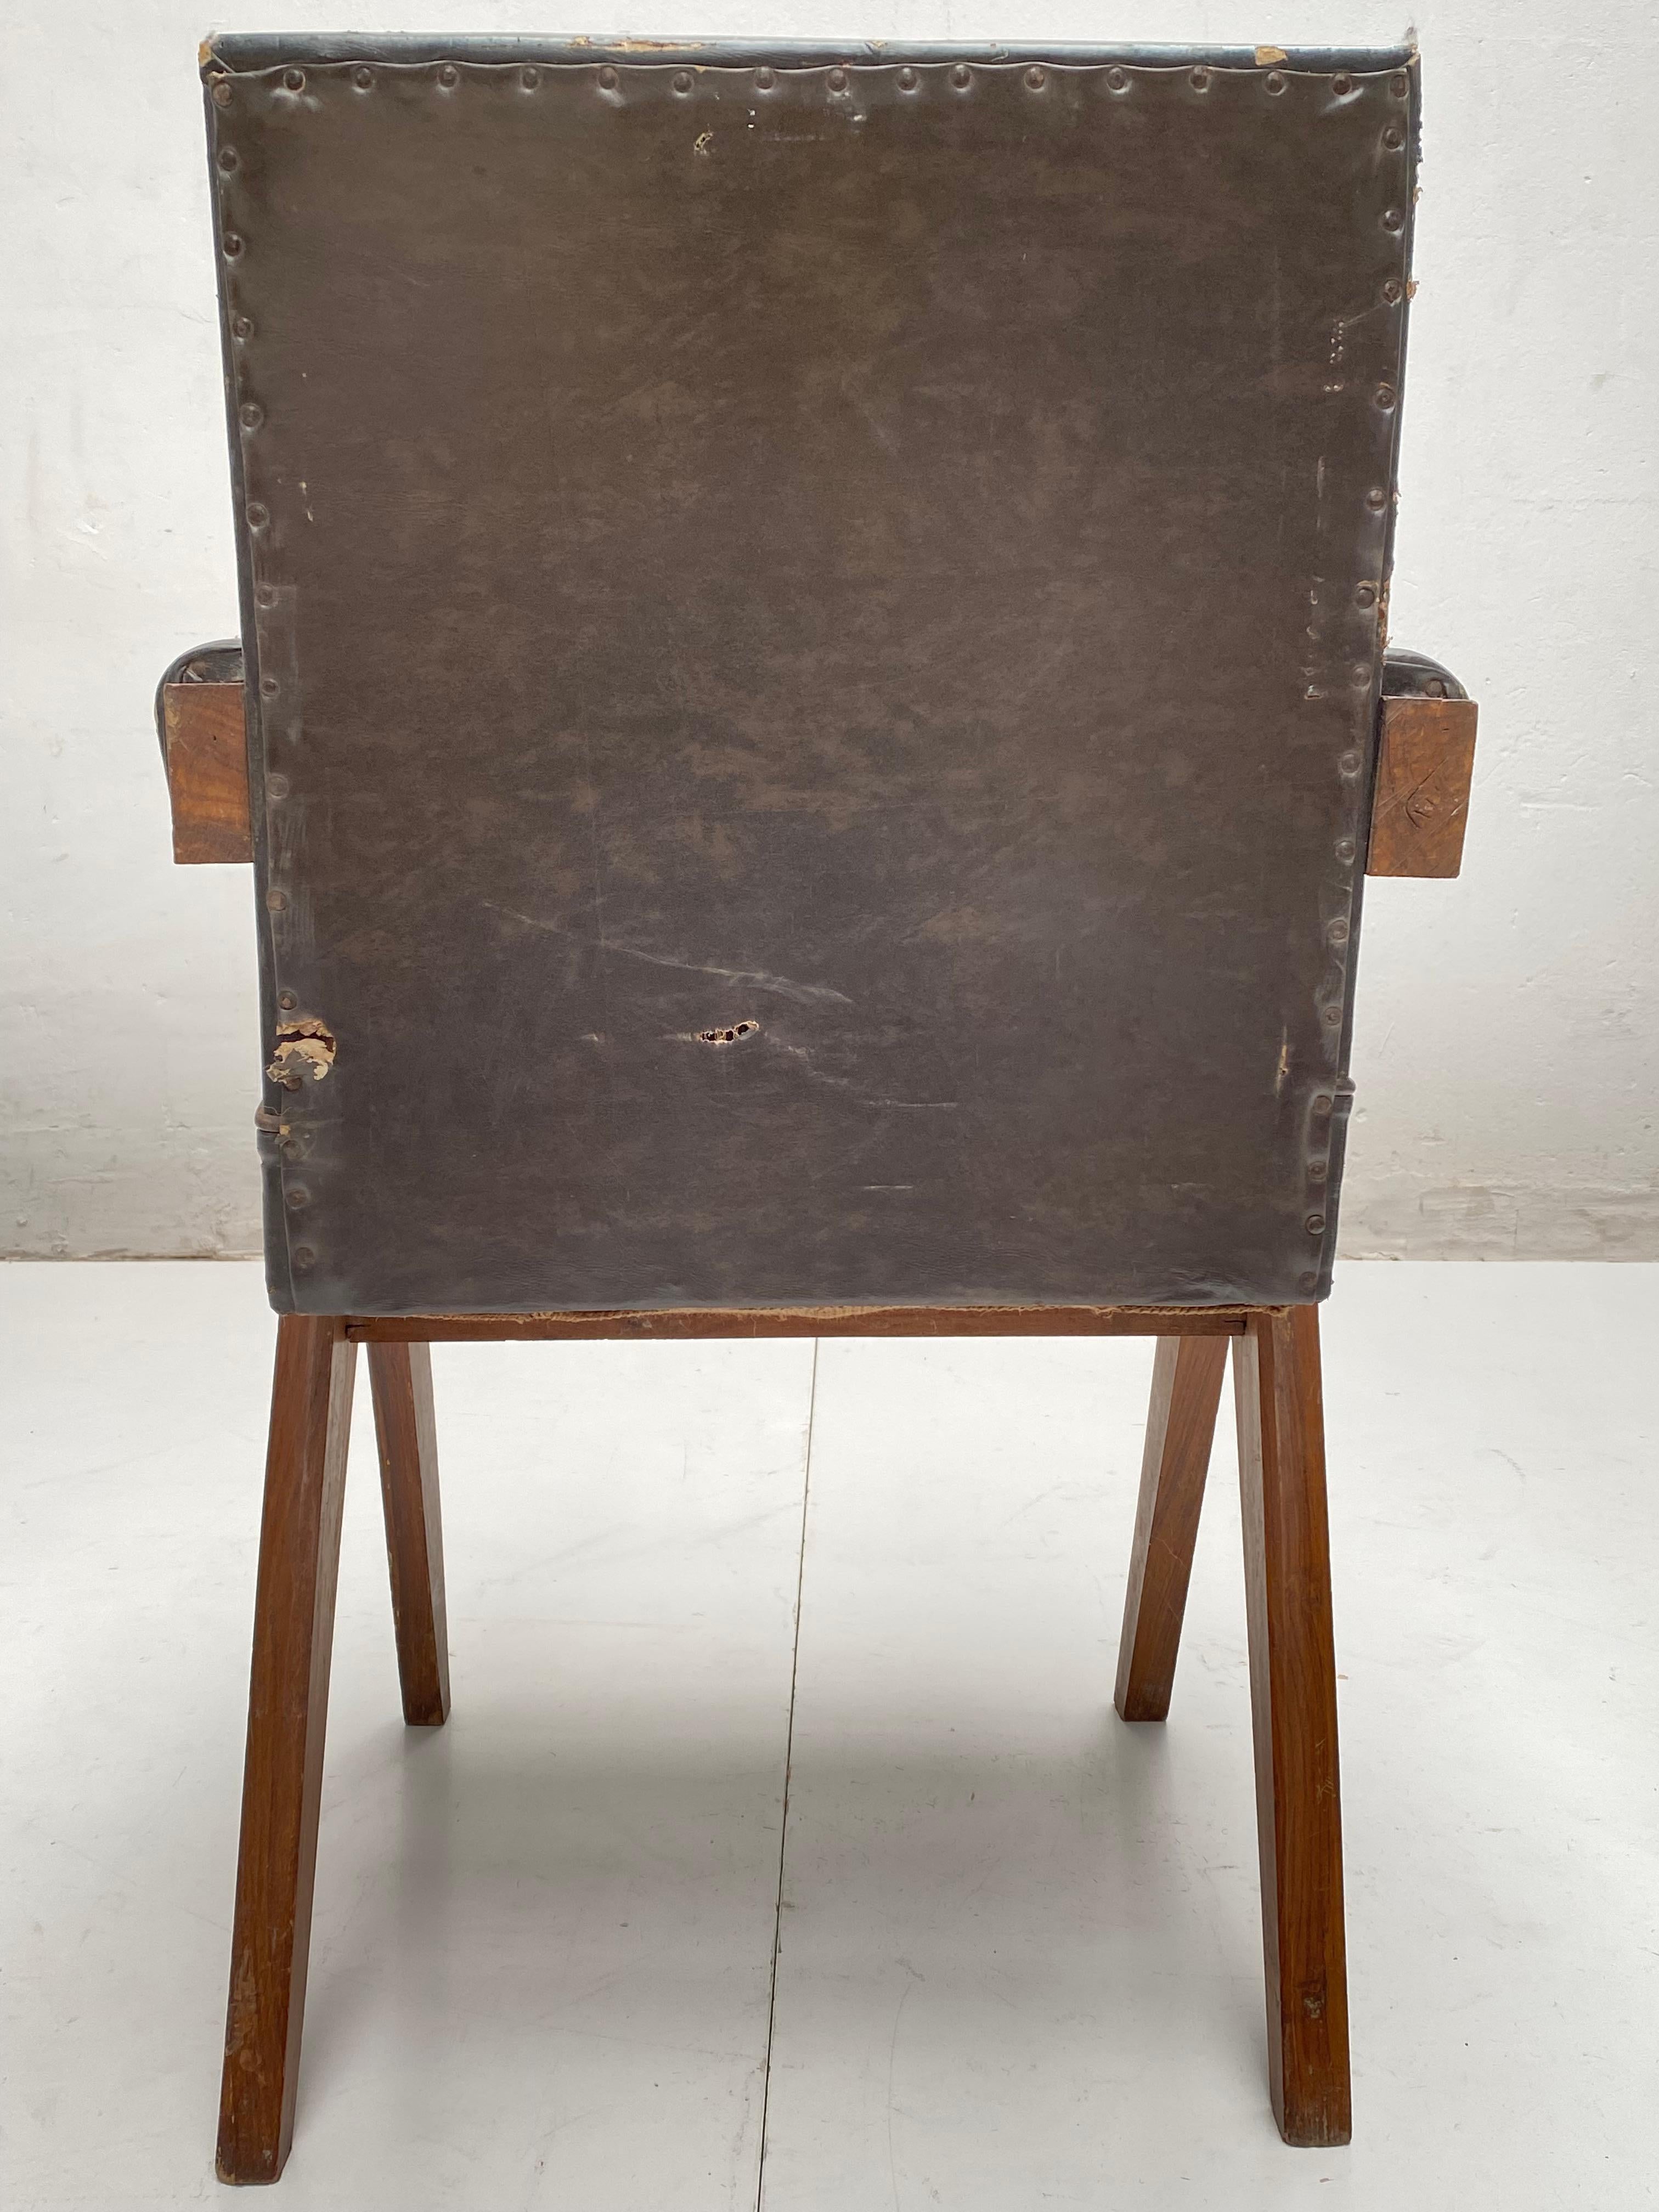 Indian Pierre Jeanneret 'Senat' Chair Designed for Chandigarh's High Court, 1959-60 For Sale